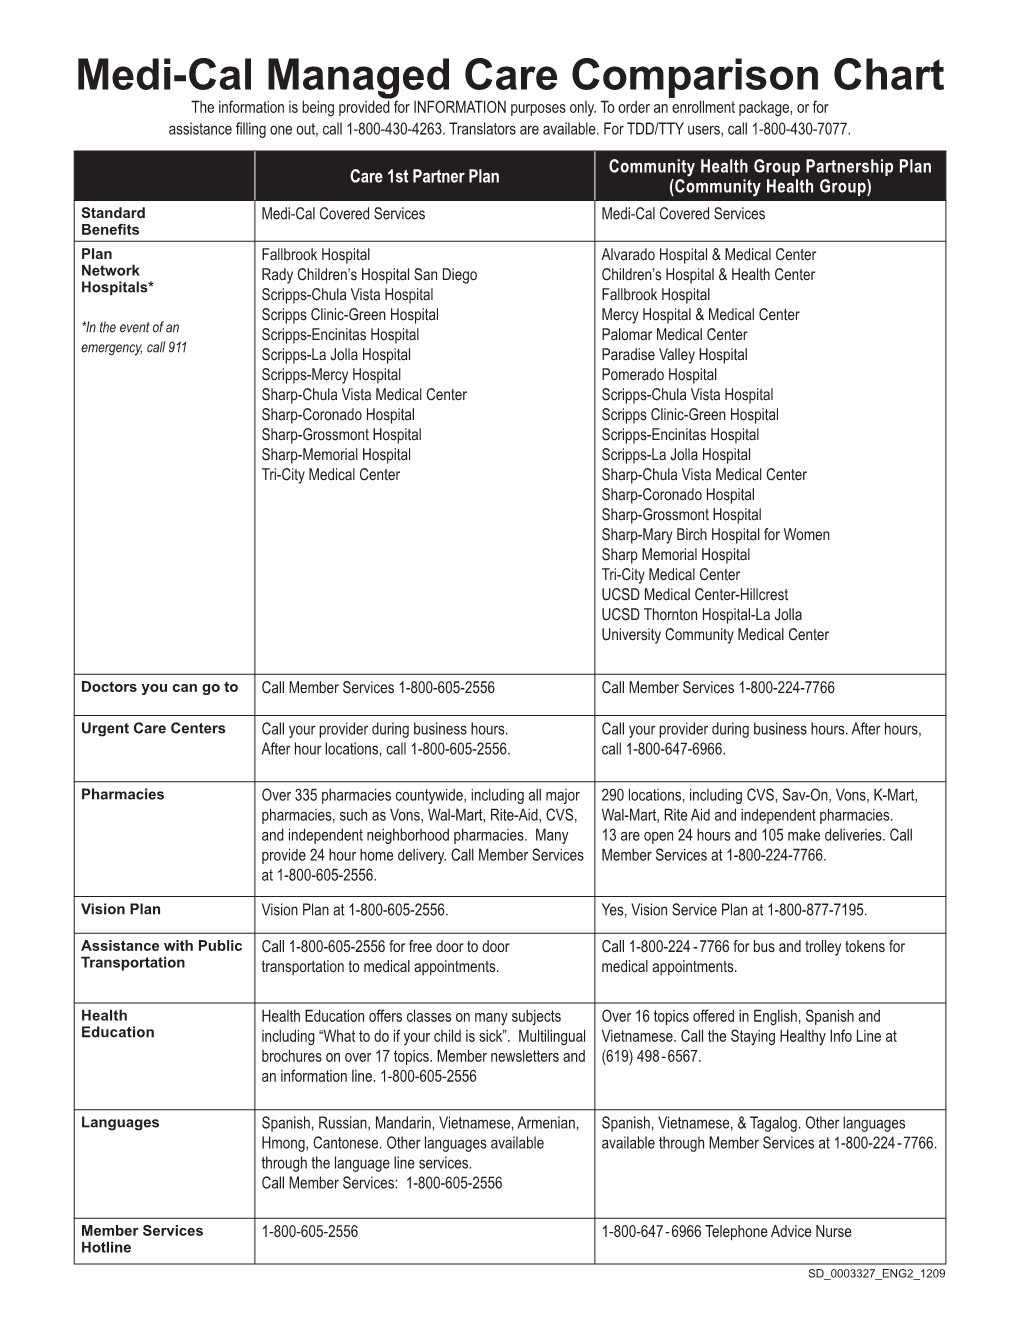 Medi-Cal Managed Care Comparison Chart the Information Is Being Provided for INFORMATION Purposes Only